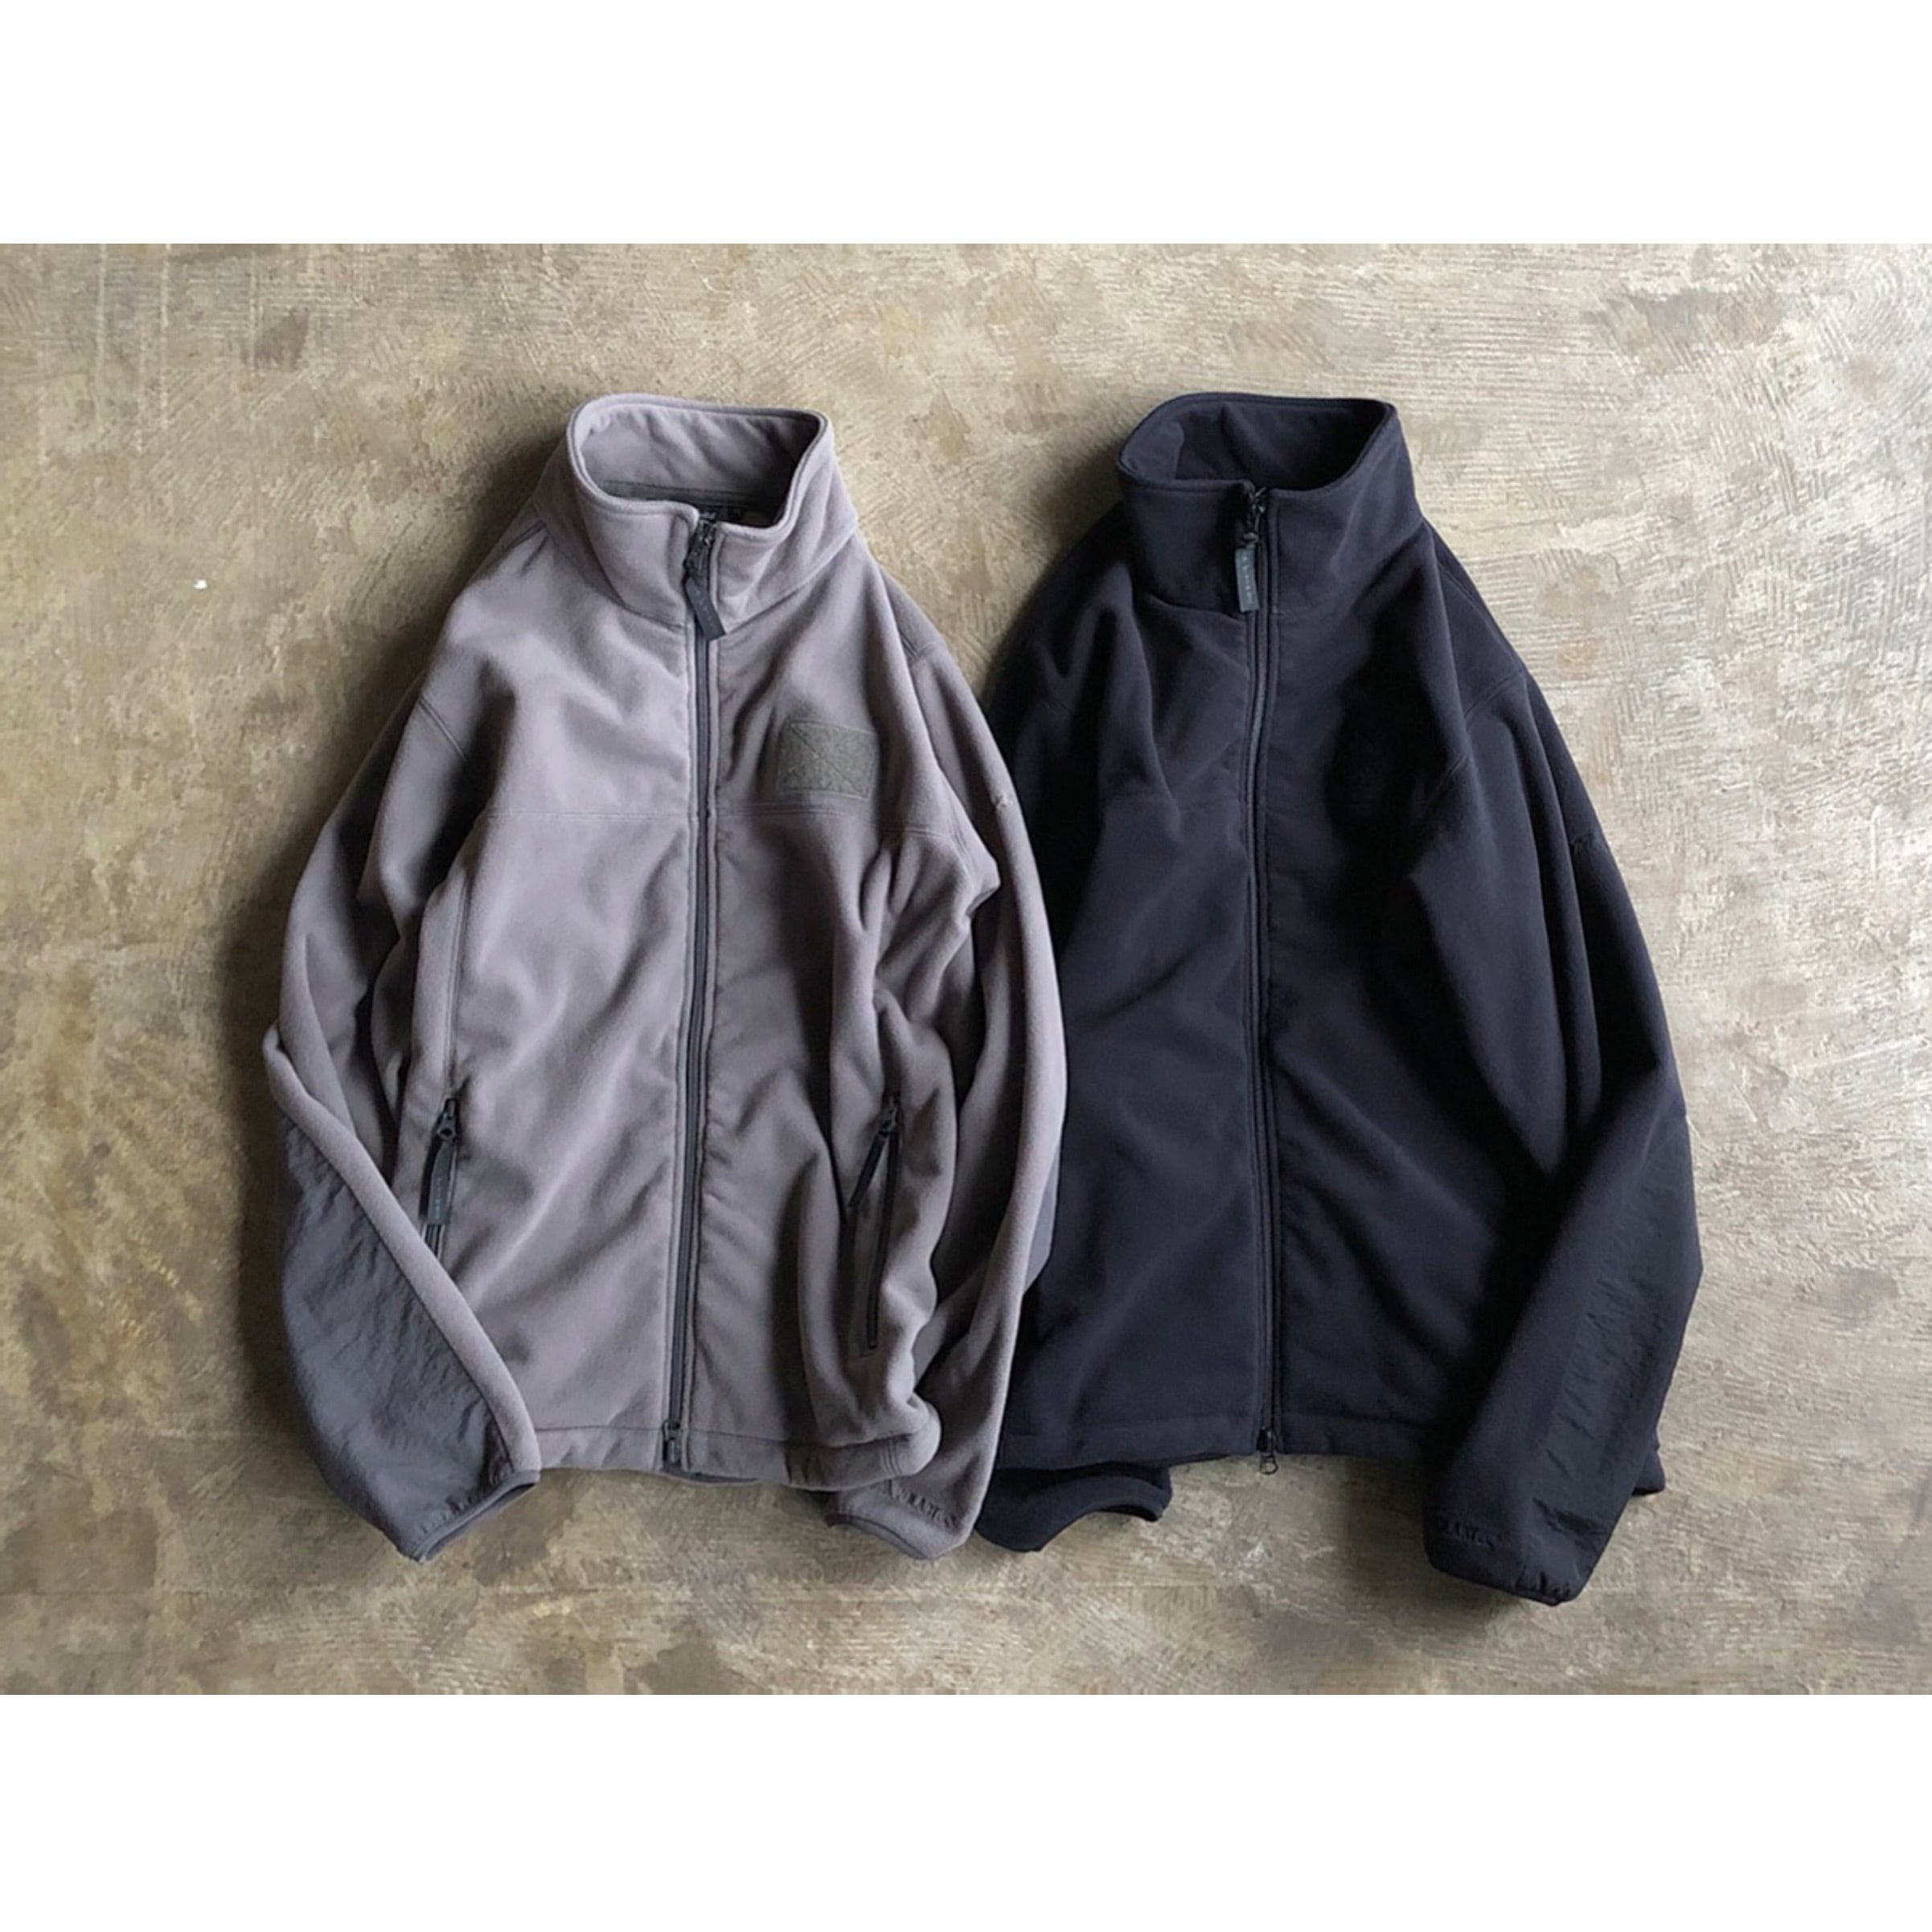 WILD THINGS (ワイルドシングス) POLARTEC WIND JACKET | AUTHENTIC Life Store powered  by BASE